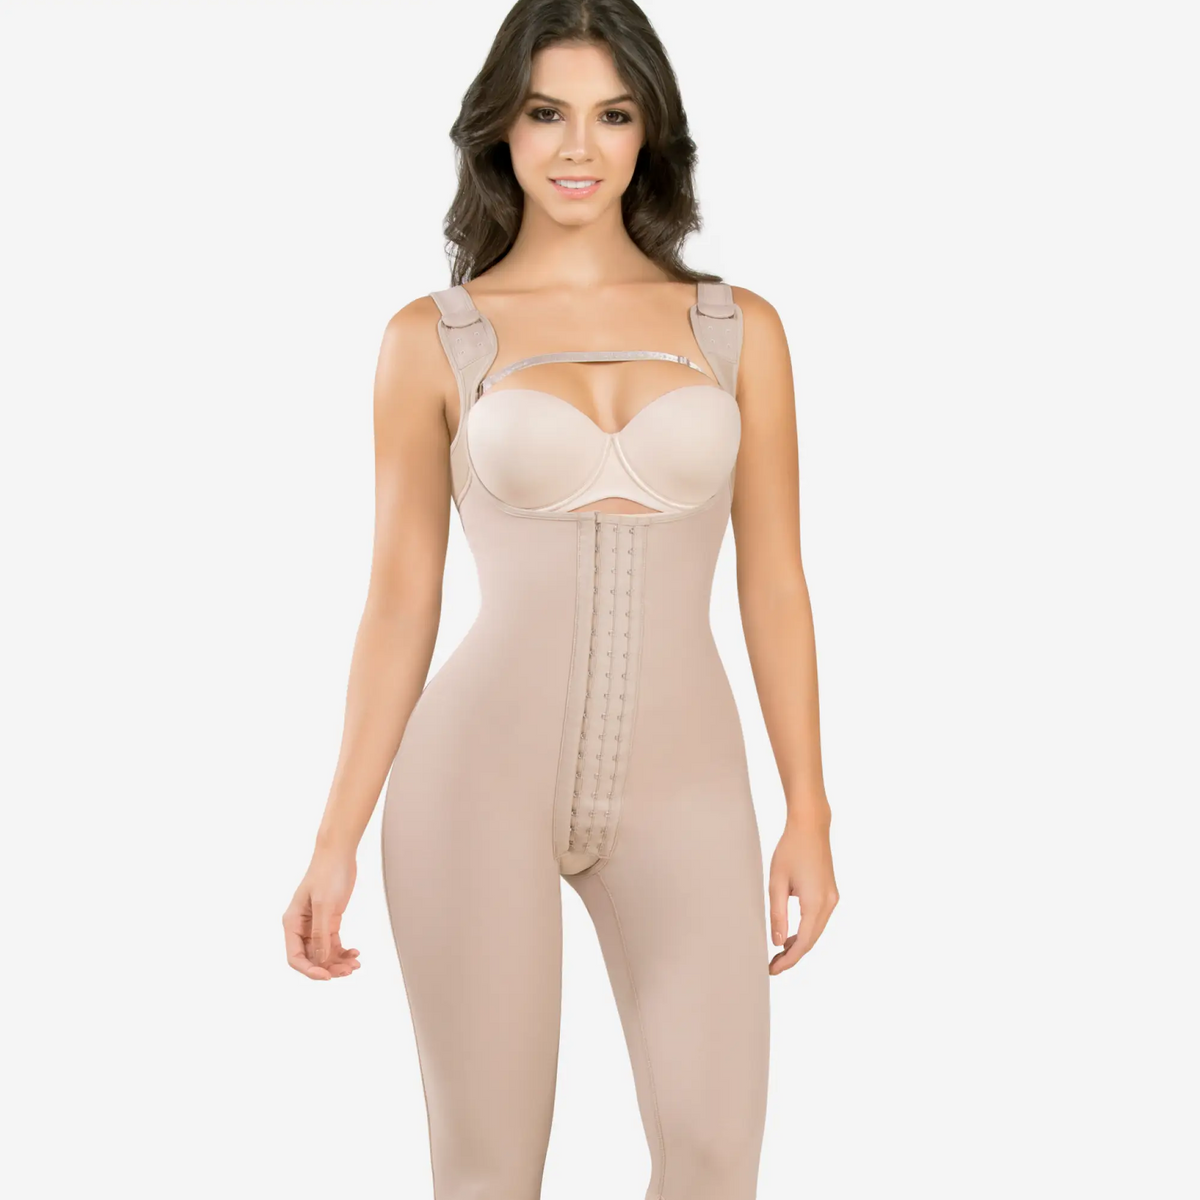 CYSM Full Body Shaper with Butt Lift for Sale in Los Angeles, CA - OfferUp